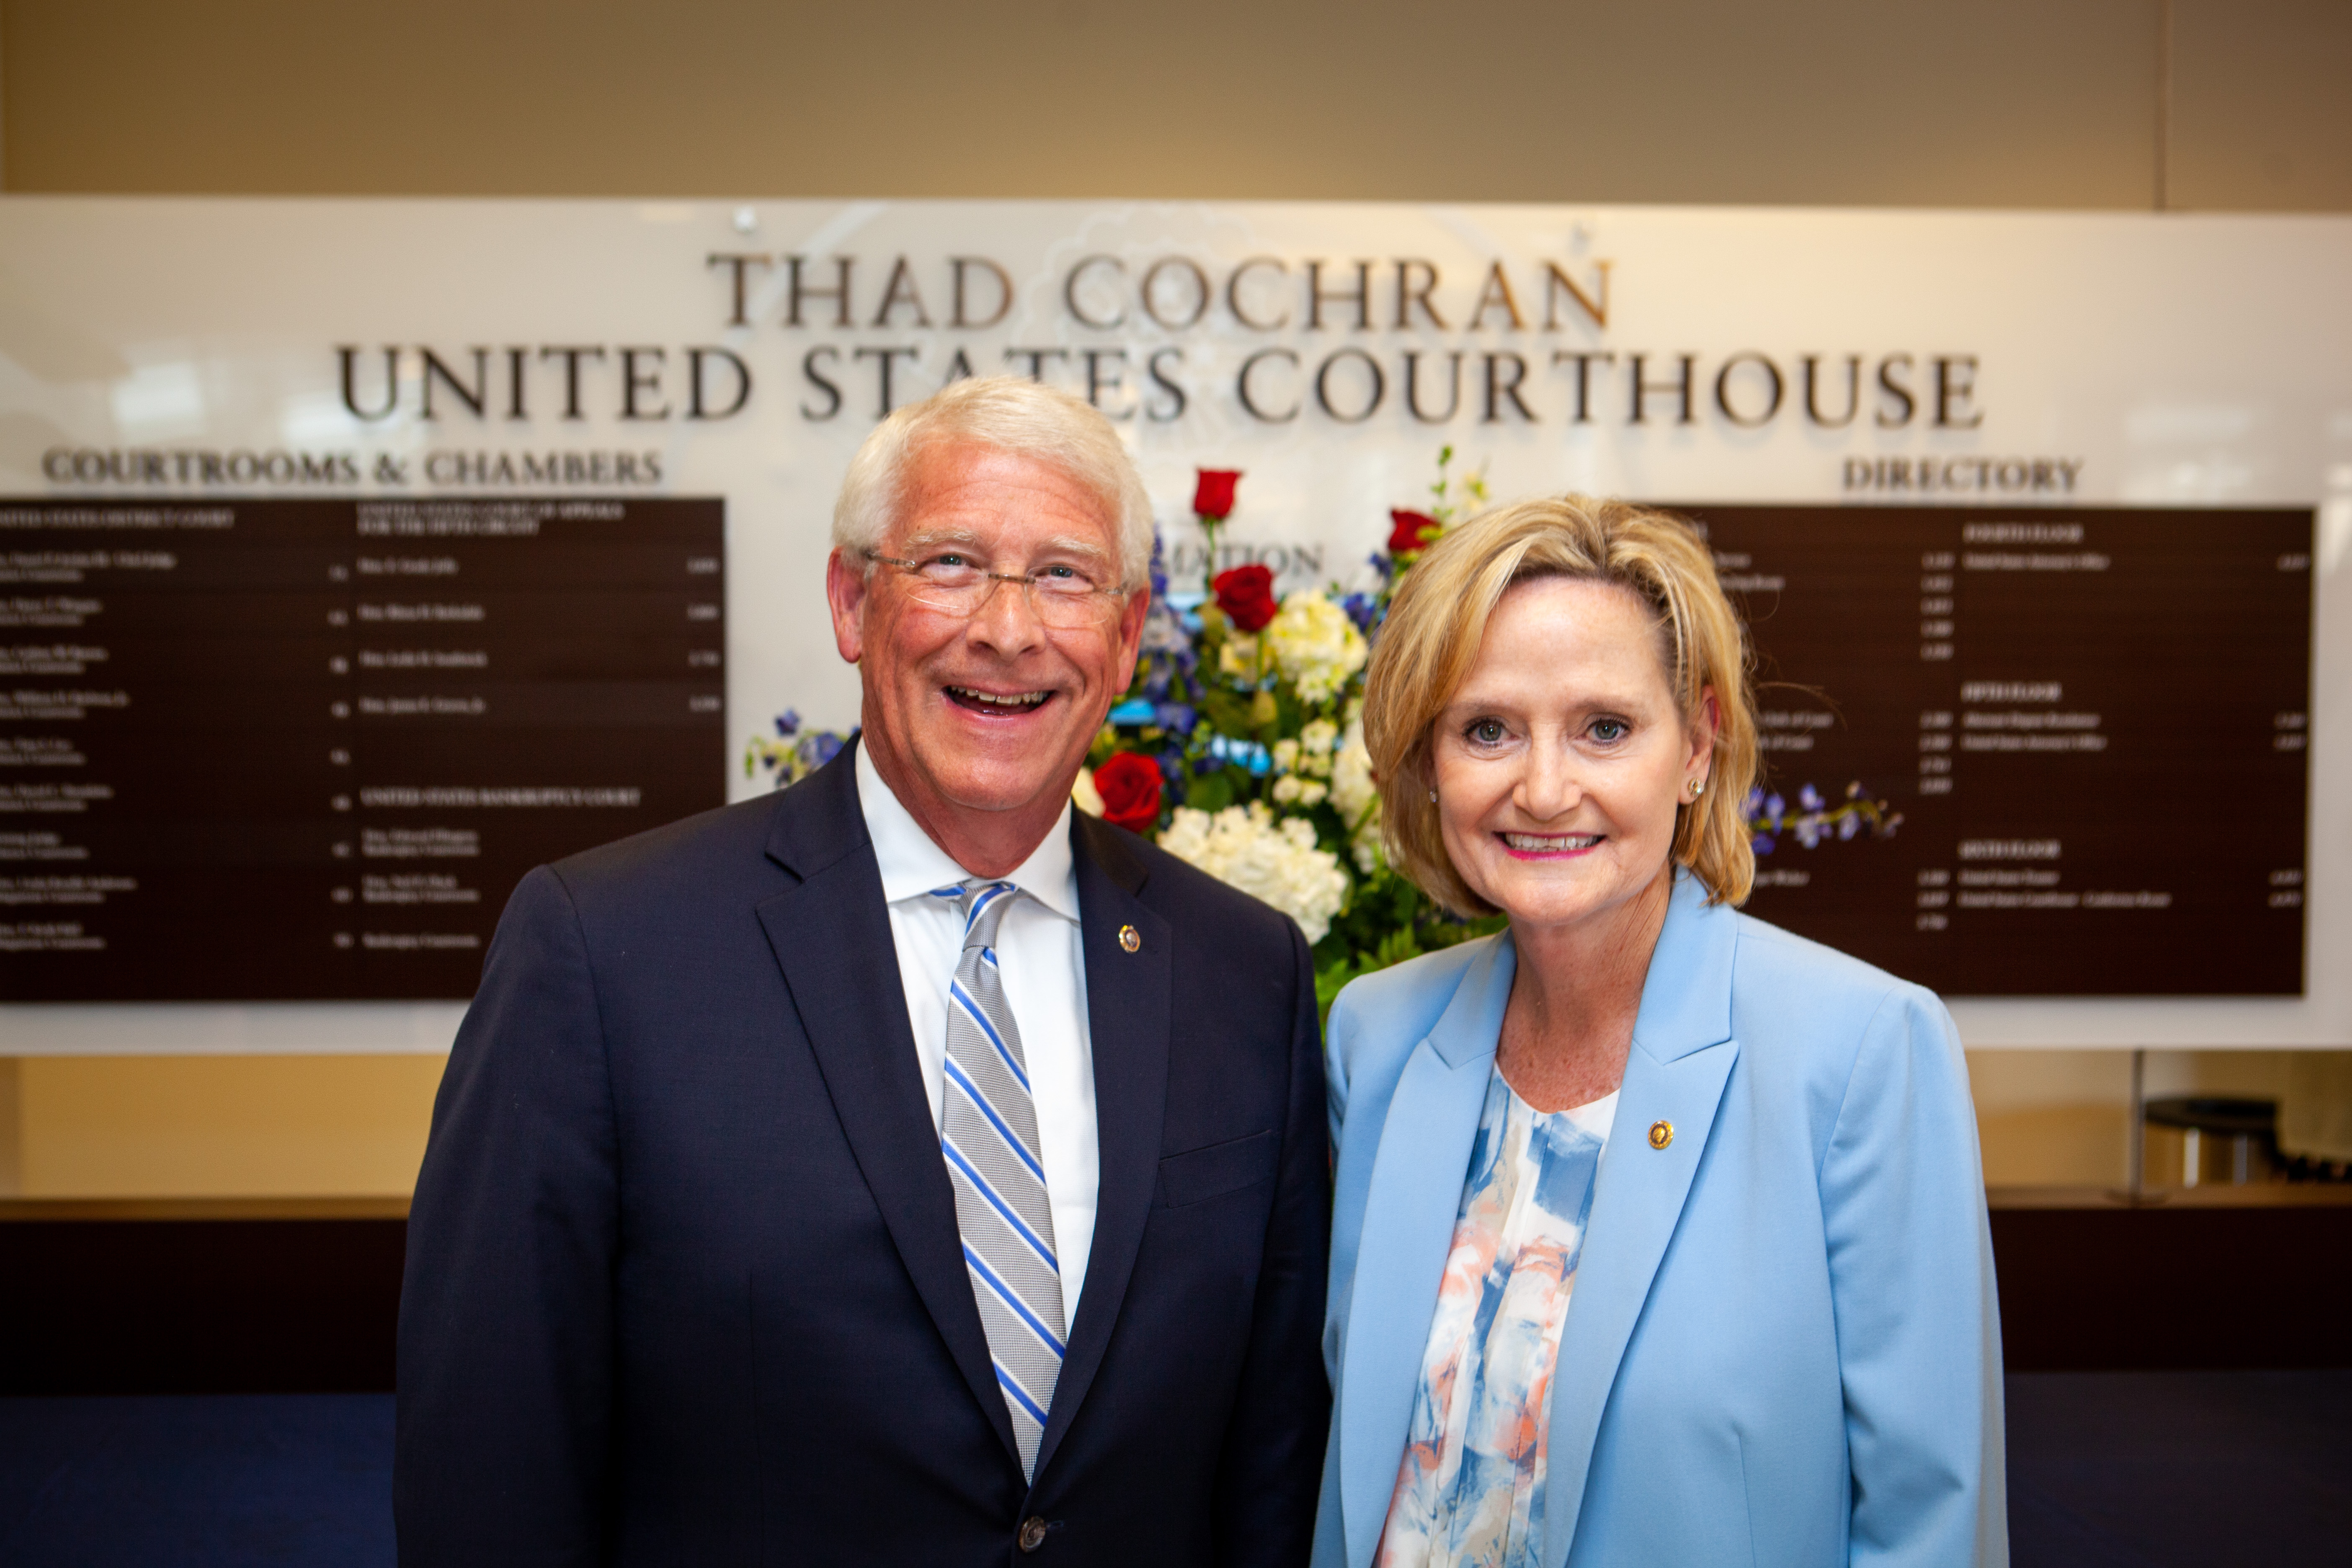 Sens. Wicker and Hyde-Smith at Thad Cochran U.S. Courthouse naming ceremony last August